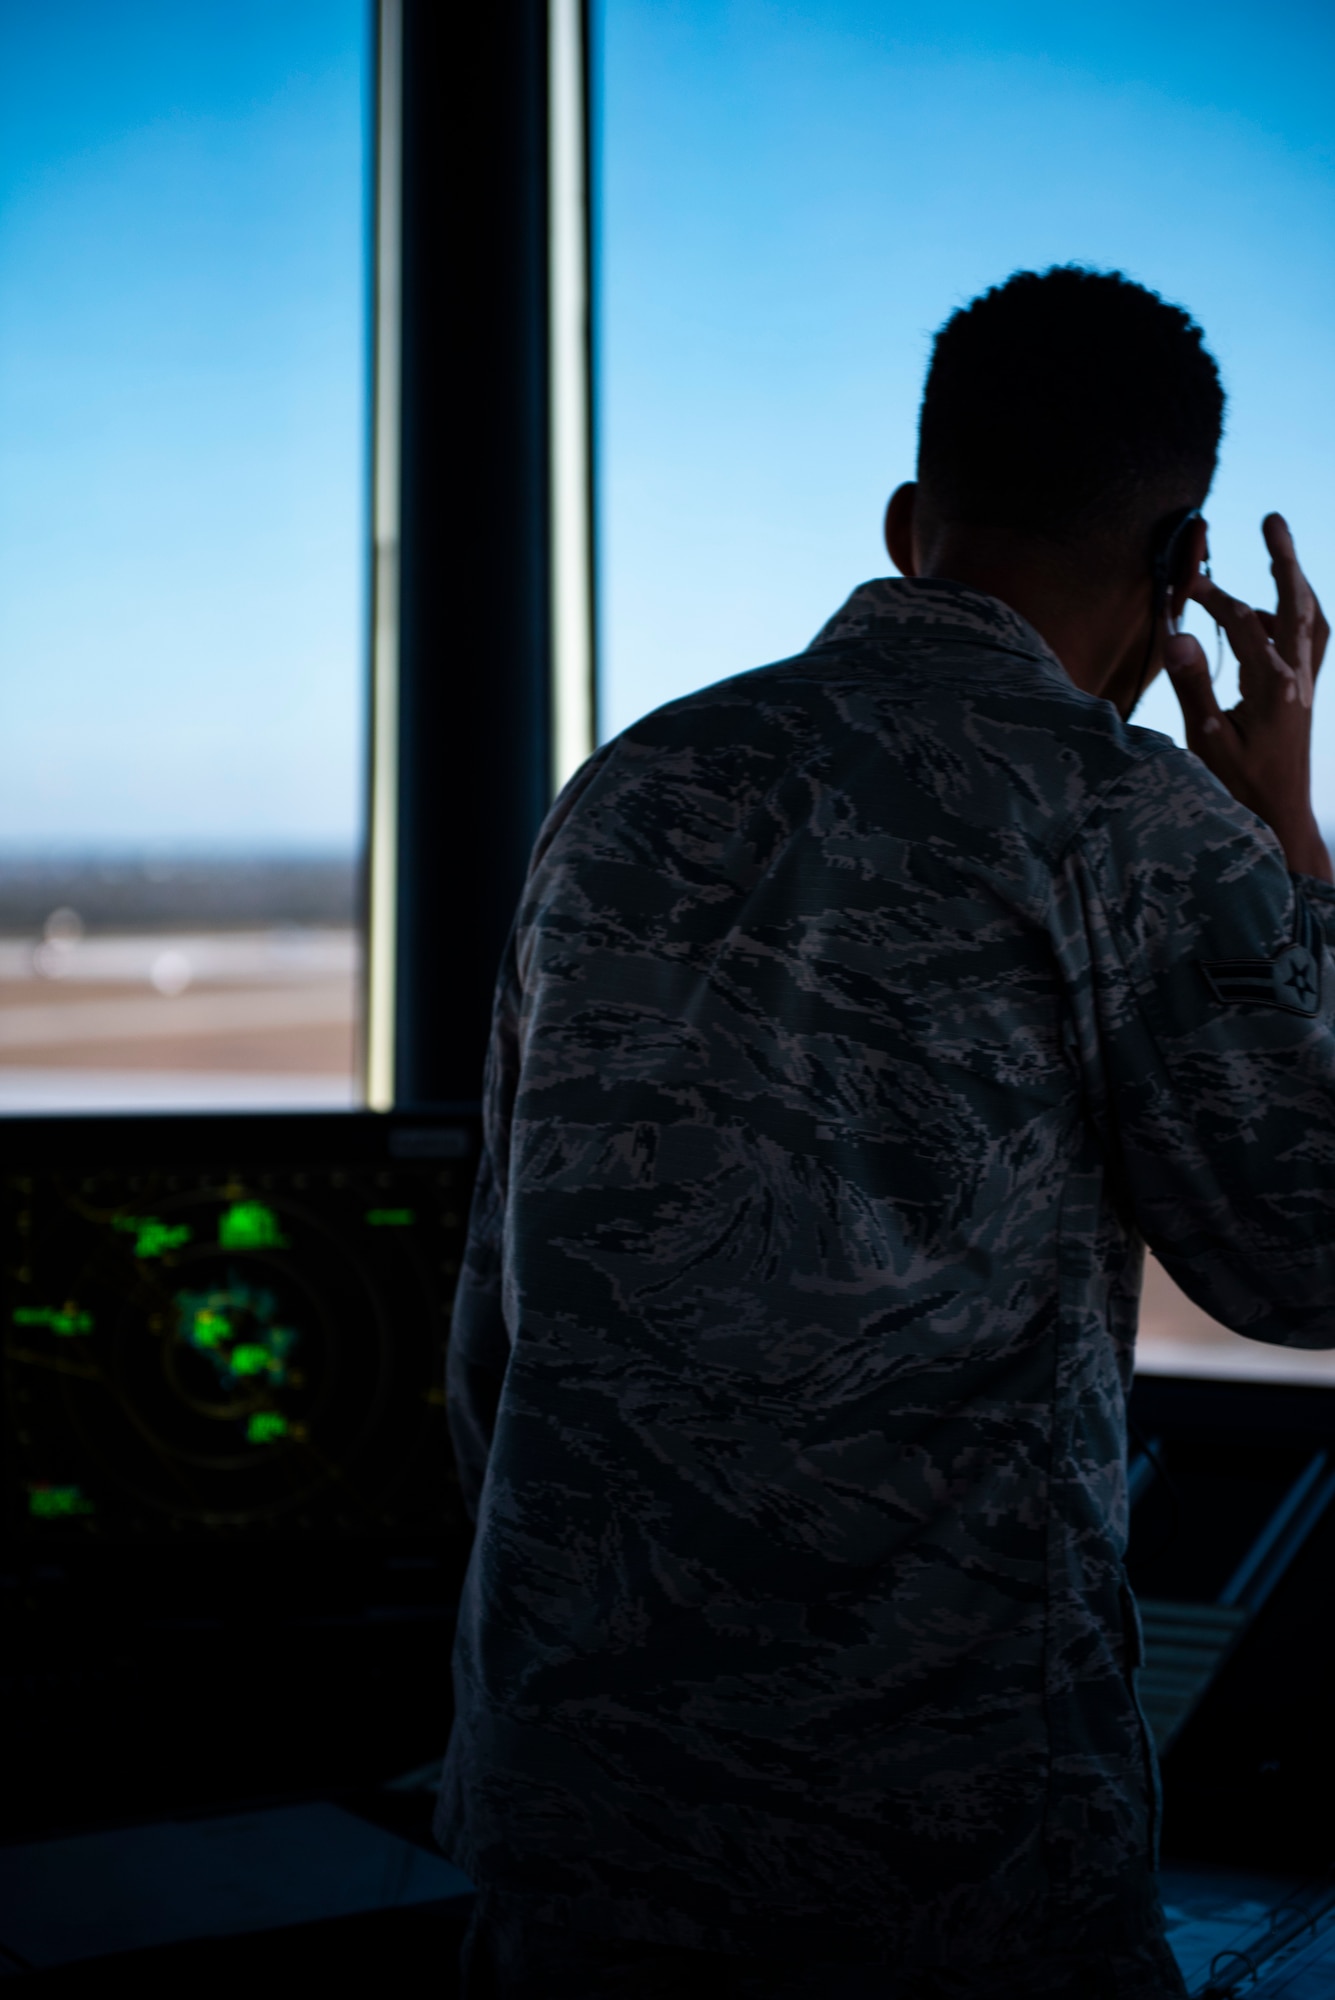 Airman 1st Class Treyzhaun, 325th Operations Support Squadron, air traffic controller, communicates with inbound and outbound pilots trafficking the runway in support of exercise Checkered Flag 20-1 at Tyndall Air Force Base, Florida, Nov. 13, 2019. Checkered Flag is a large-scale exercise involving multiple military partners and installations, designed to focus on training and evaluating fourth and fifth-generation fighter aircraft, pilots and maintainers. In conduction with the exercise, air-to-air and air-to-ground combat operations are tested and recorded to provide data on best practices and ensuring future mission successes. (U.S. Air Force photo by Staff Sgt. Magen M. Reeves)